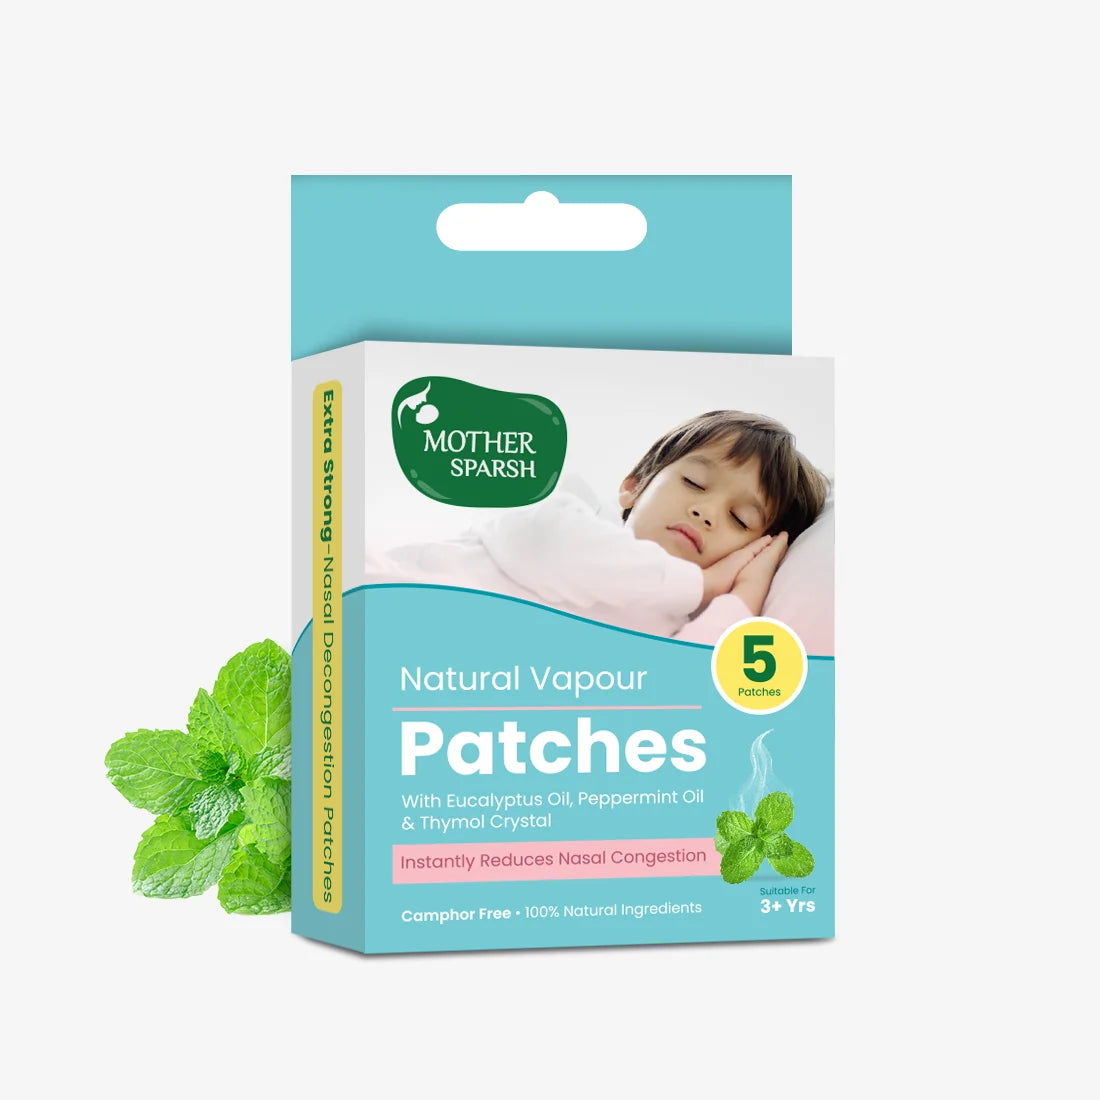 Natural Vapour Patches for kids above 3+ years